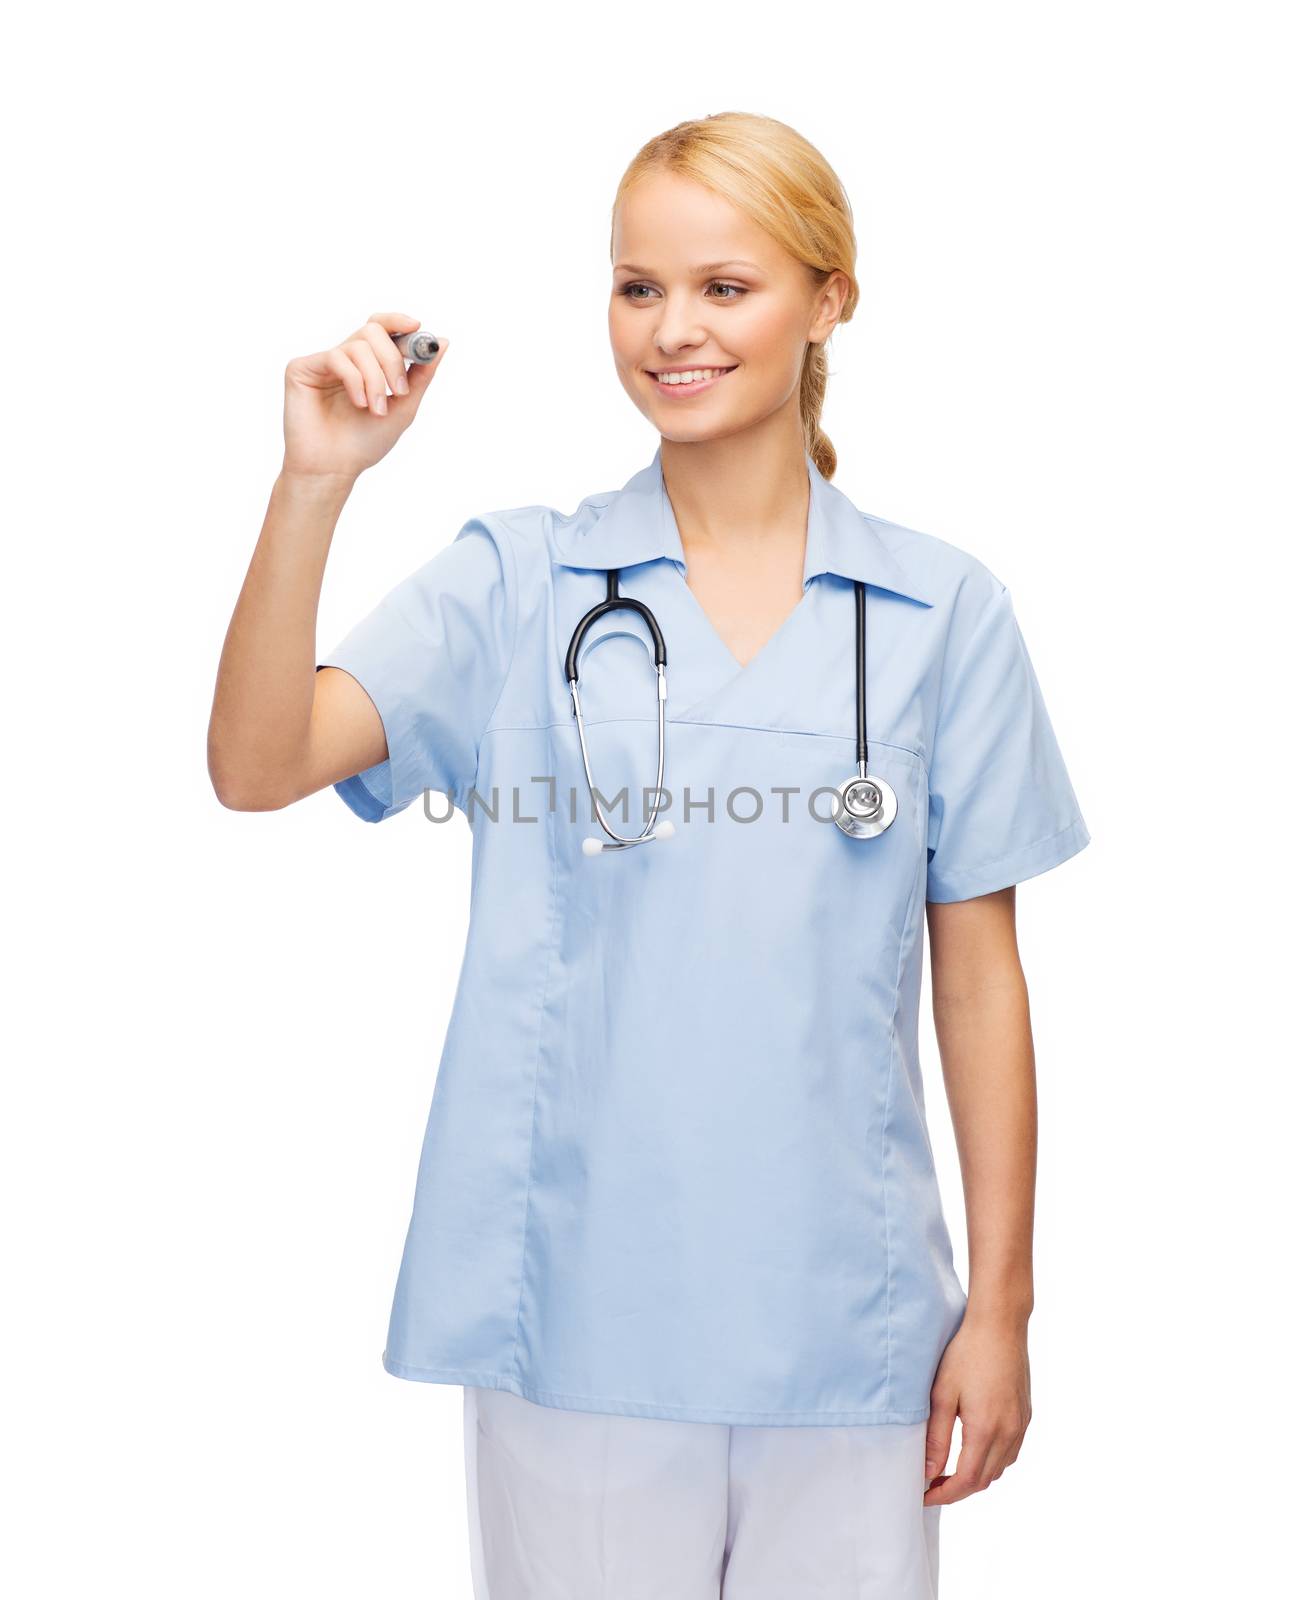 doctor or nurse working with something imaginary by dolgachov